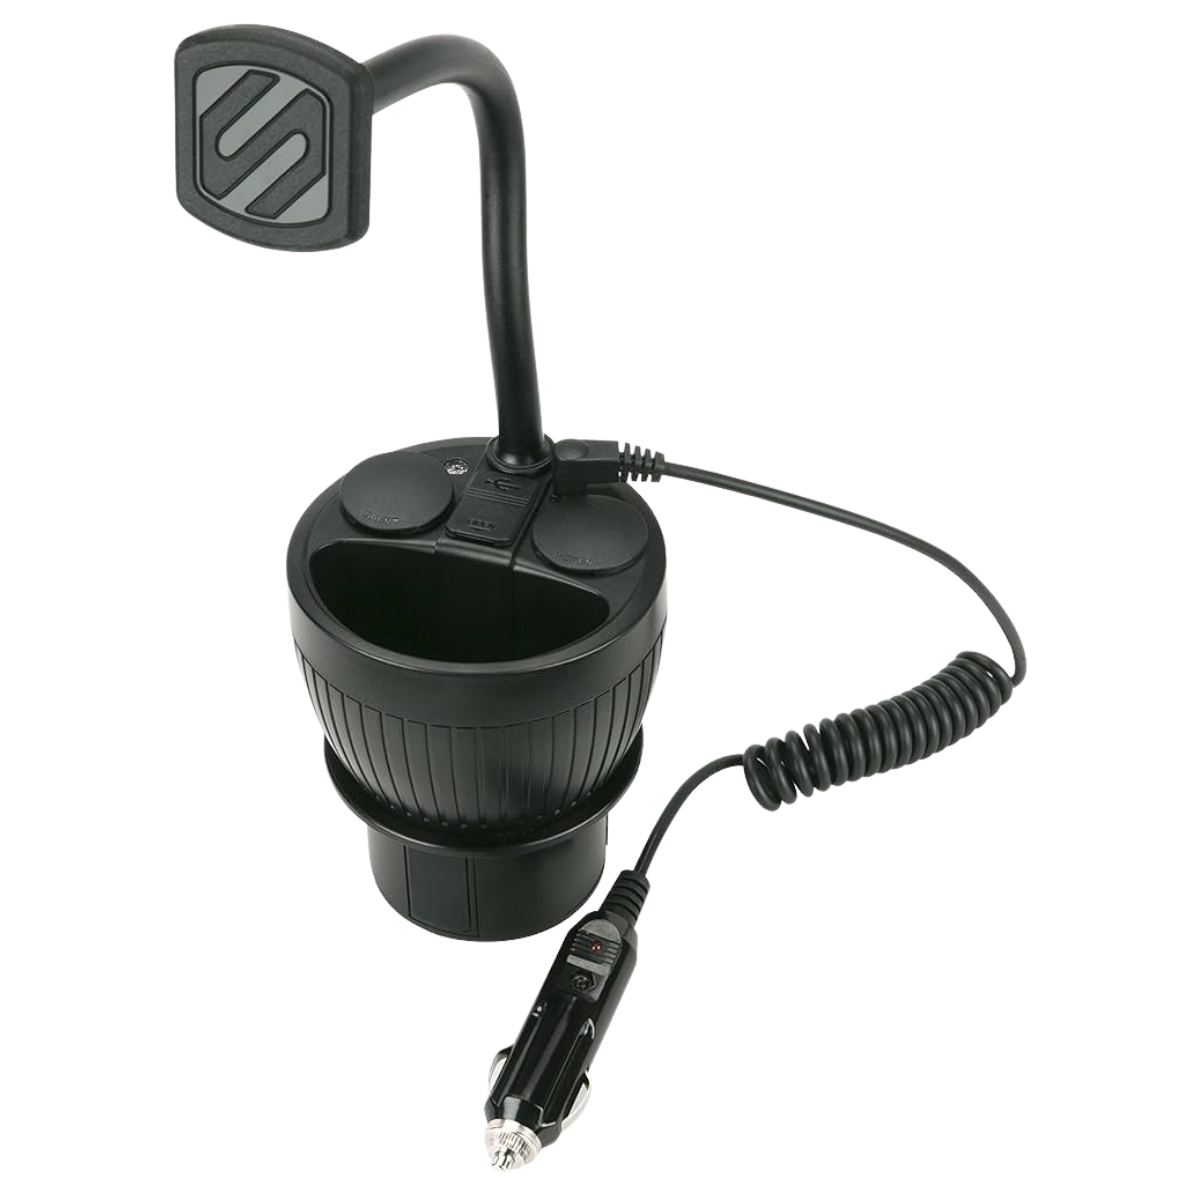 Scosche MAGPCUP MagicMount Magnetic Cup Mount and Power Hub for Mobile Devices